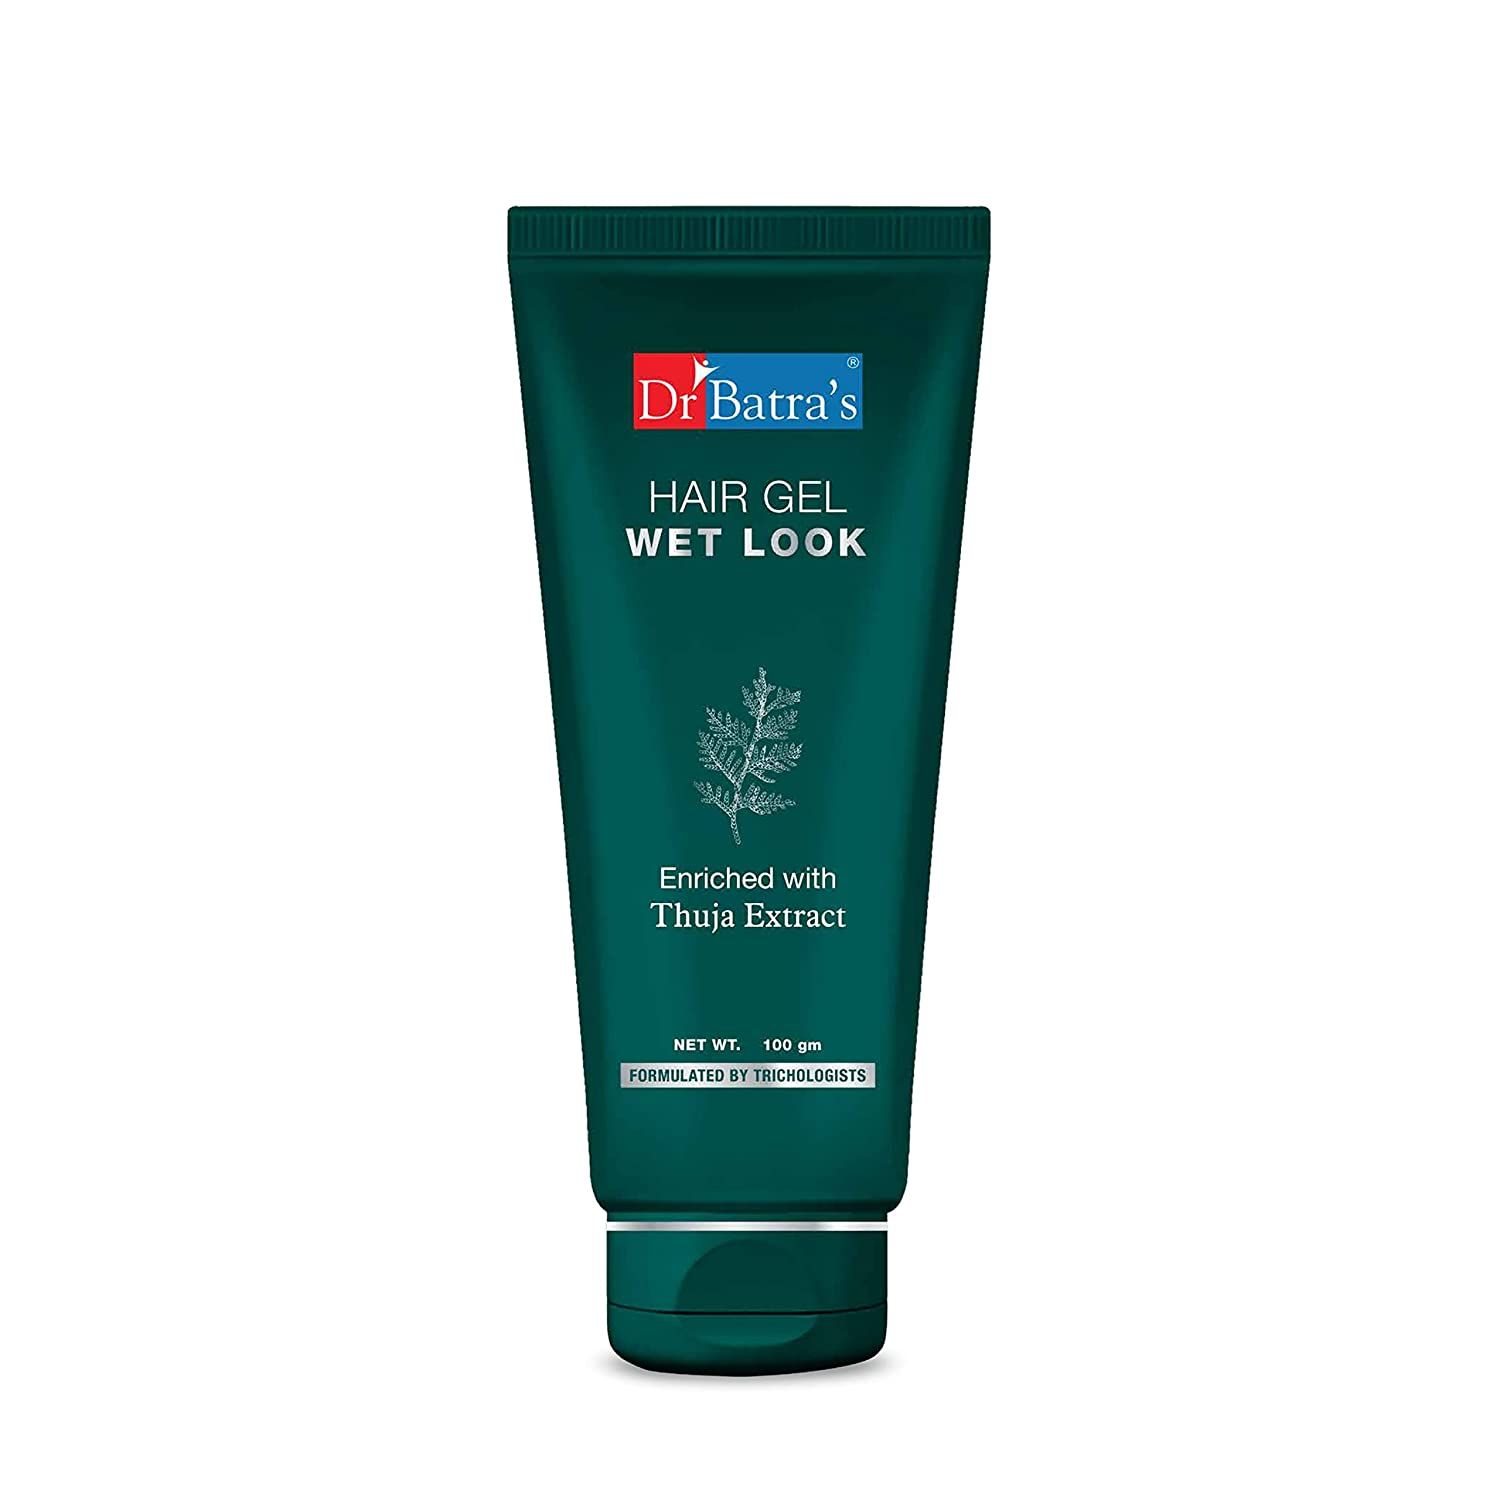 Dr Batra's Hair Gel Wet Look Enriched With Thuja